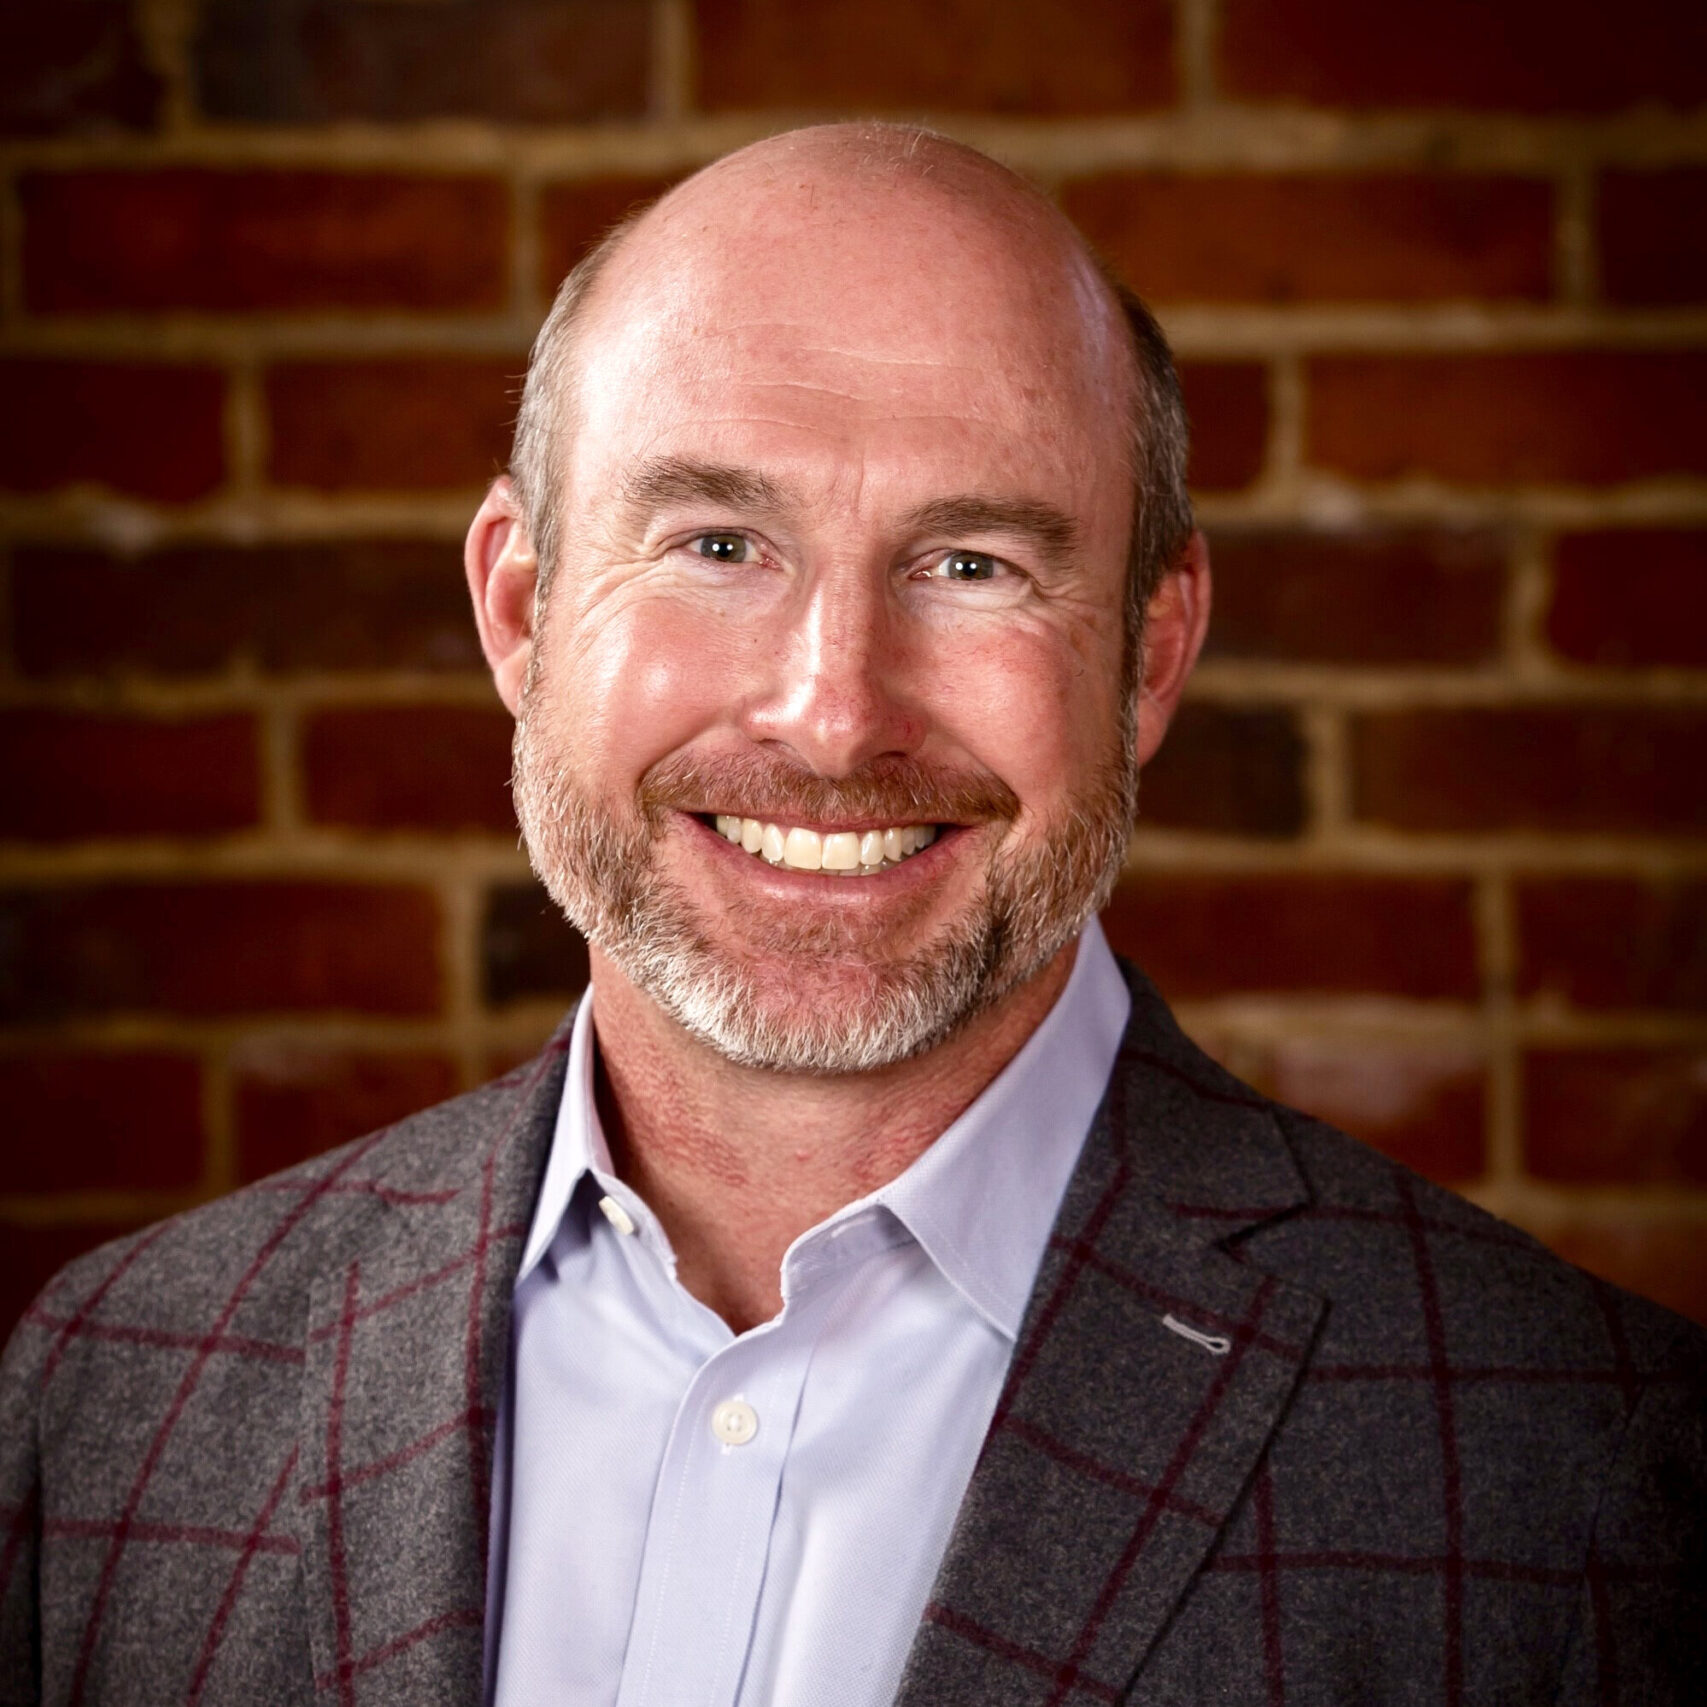 Brian C. Wood, Founder and Chief Executive Officer